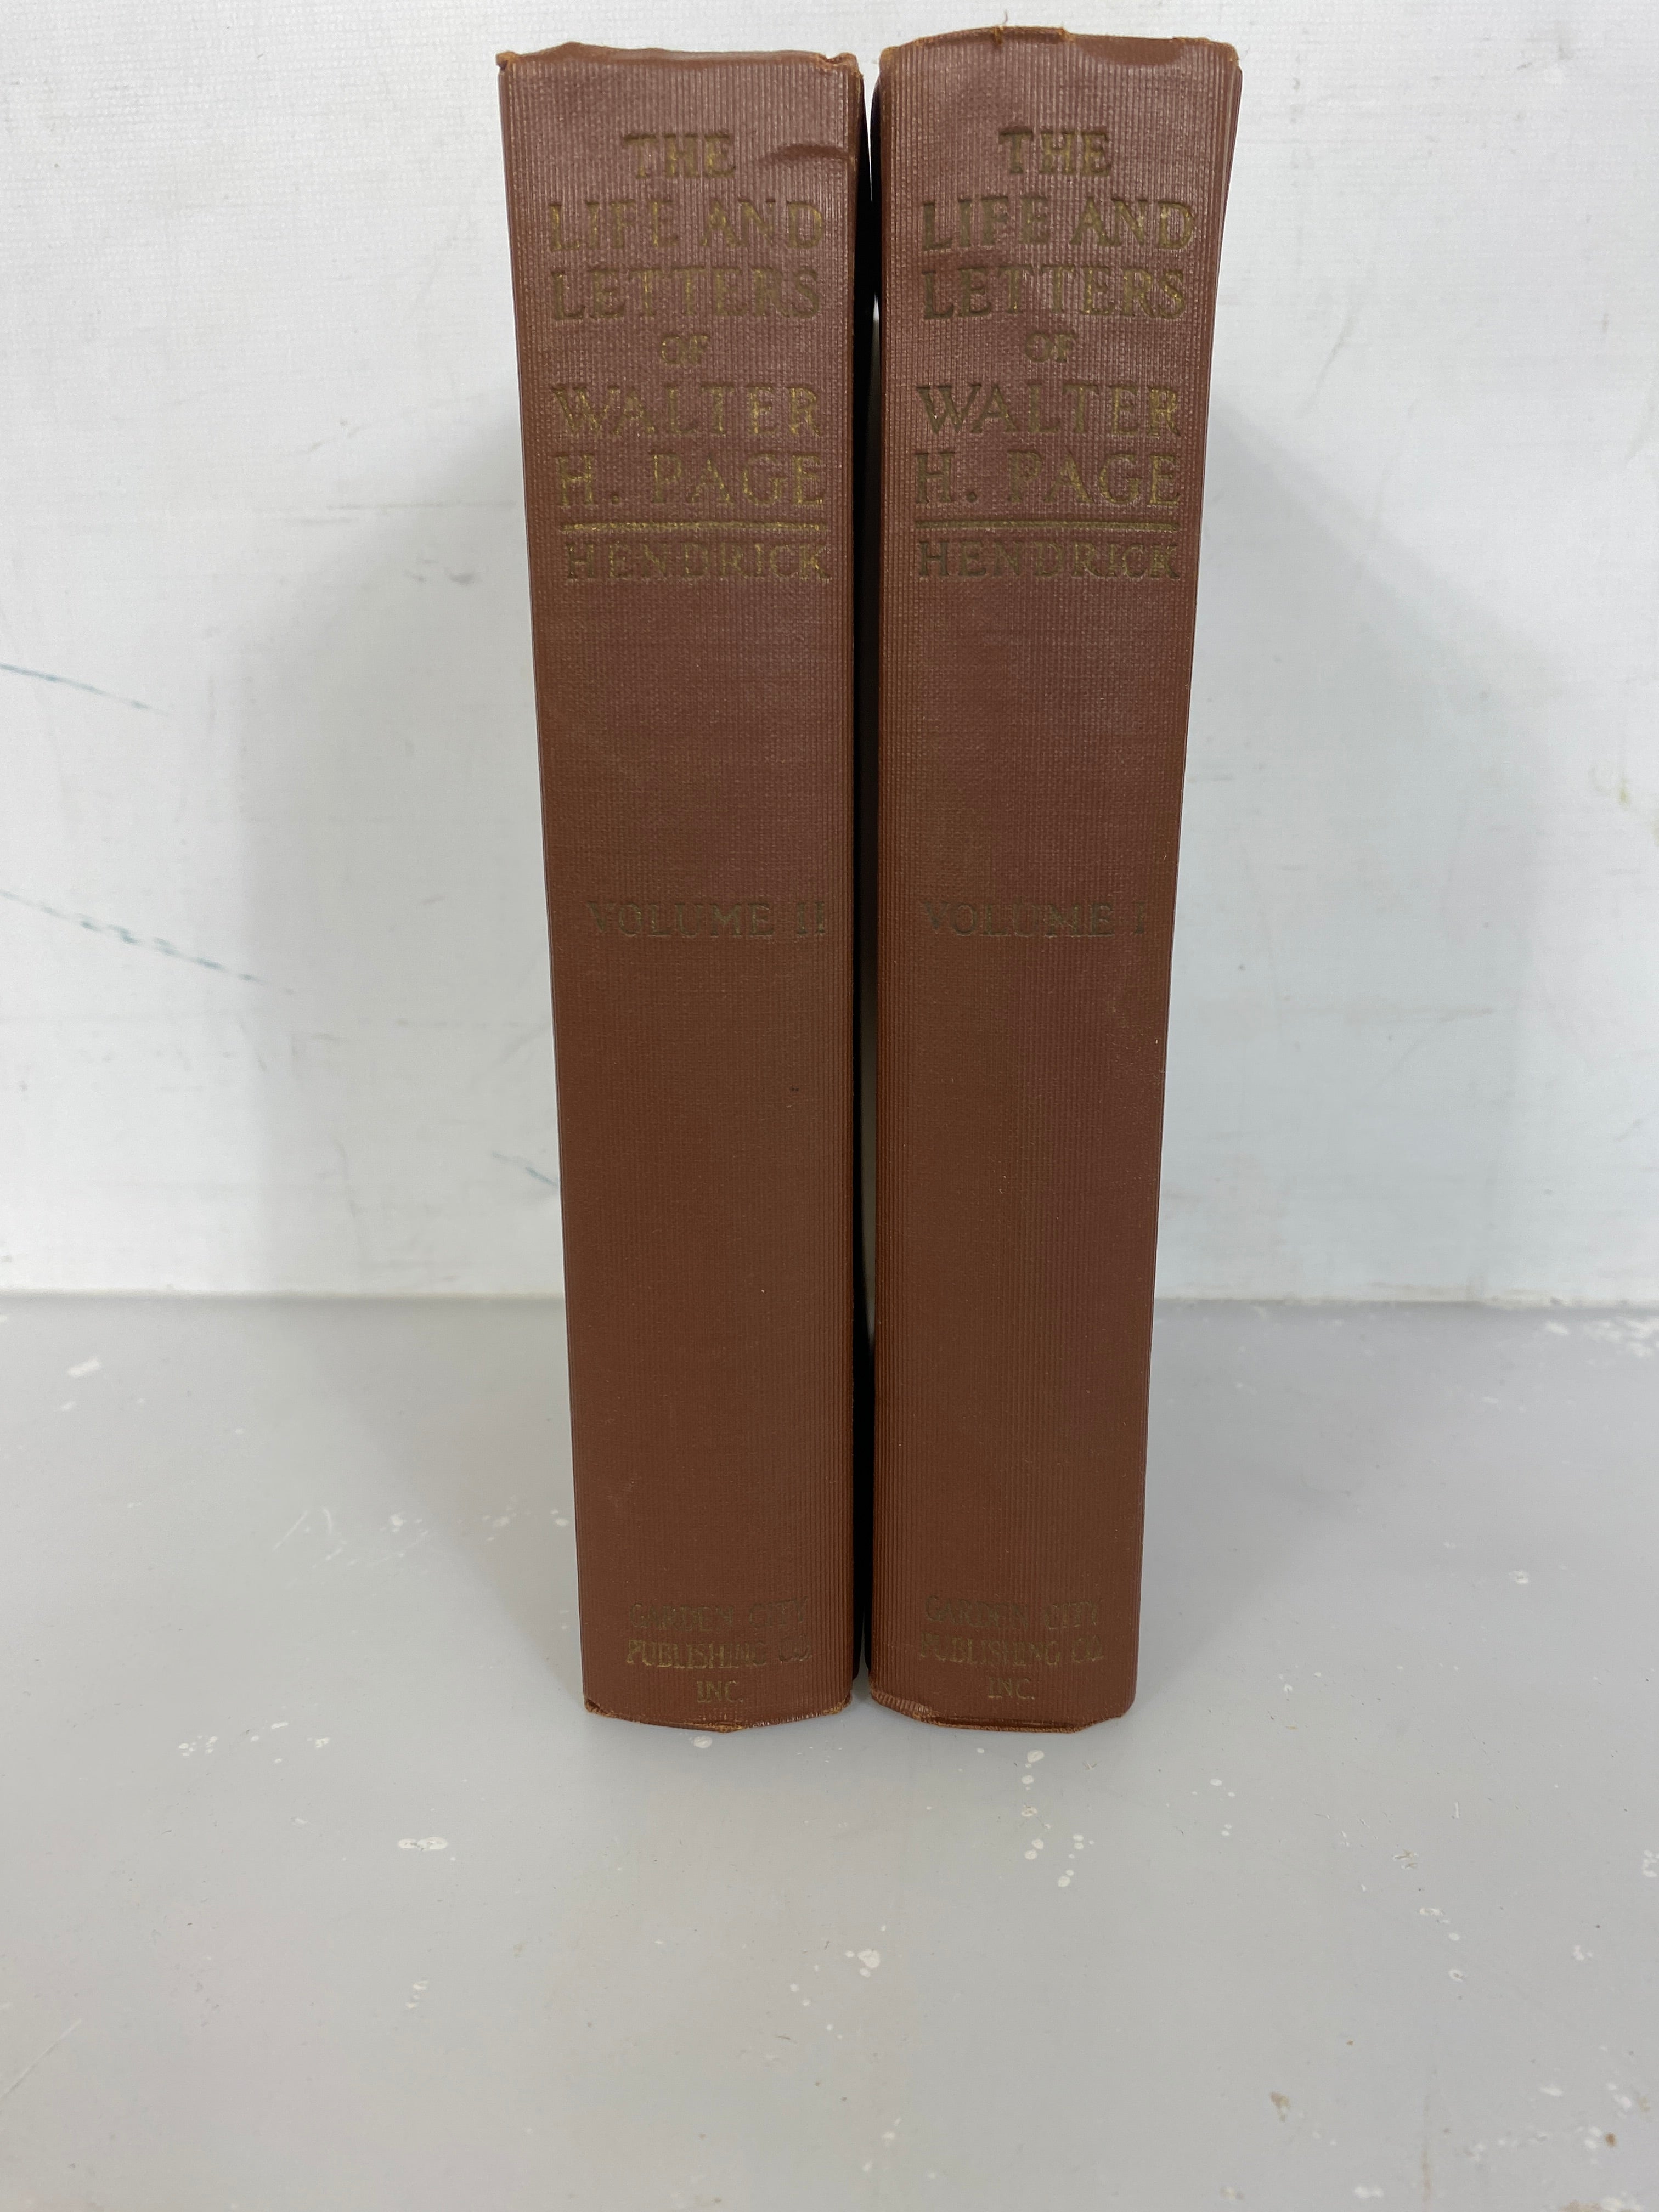 2 Volume Set of The Life & Letters of Walter H. Page 1855 to 1918 by Burton J. Hendrick 1927 HC